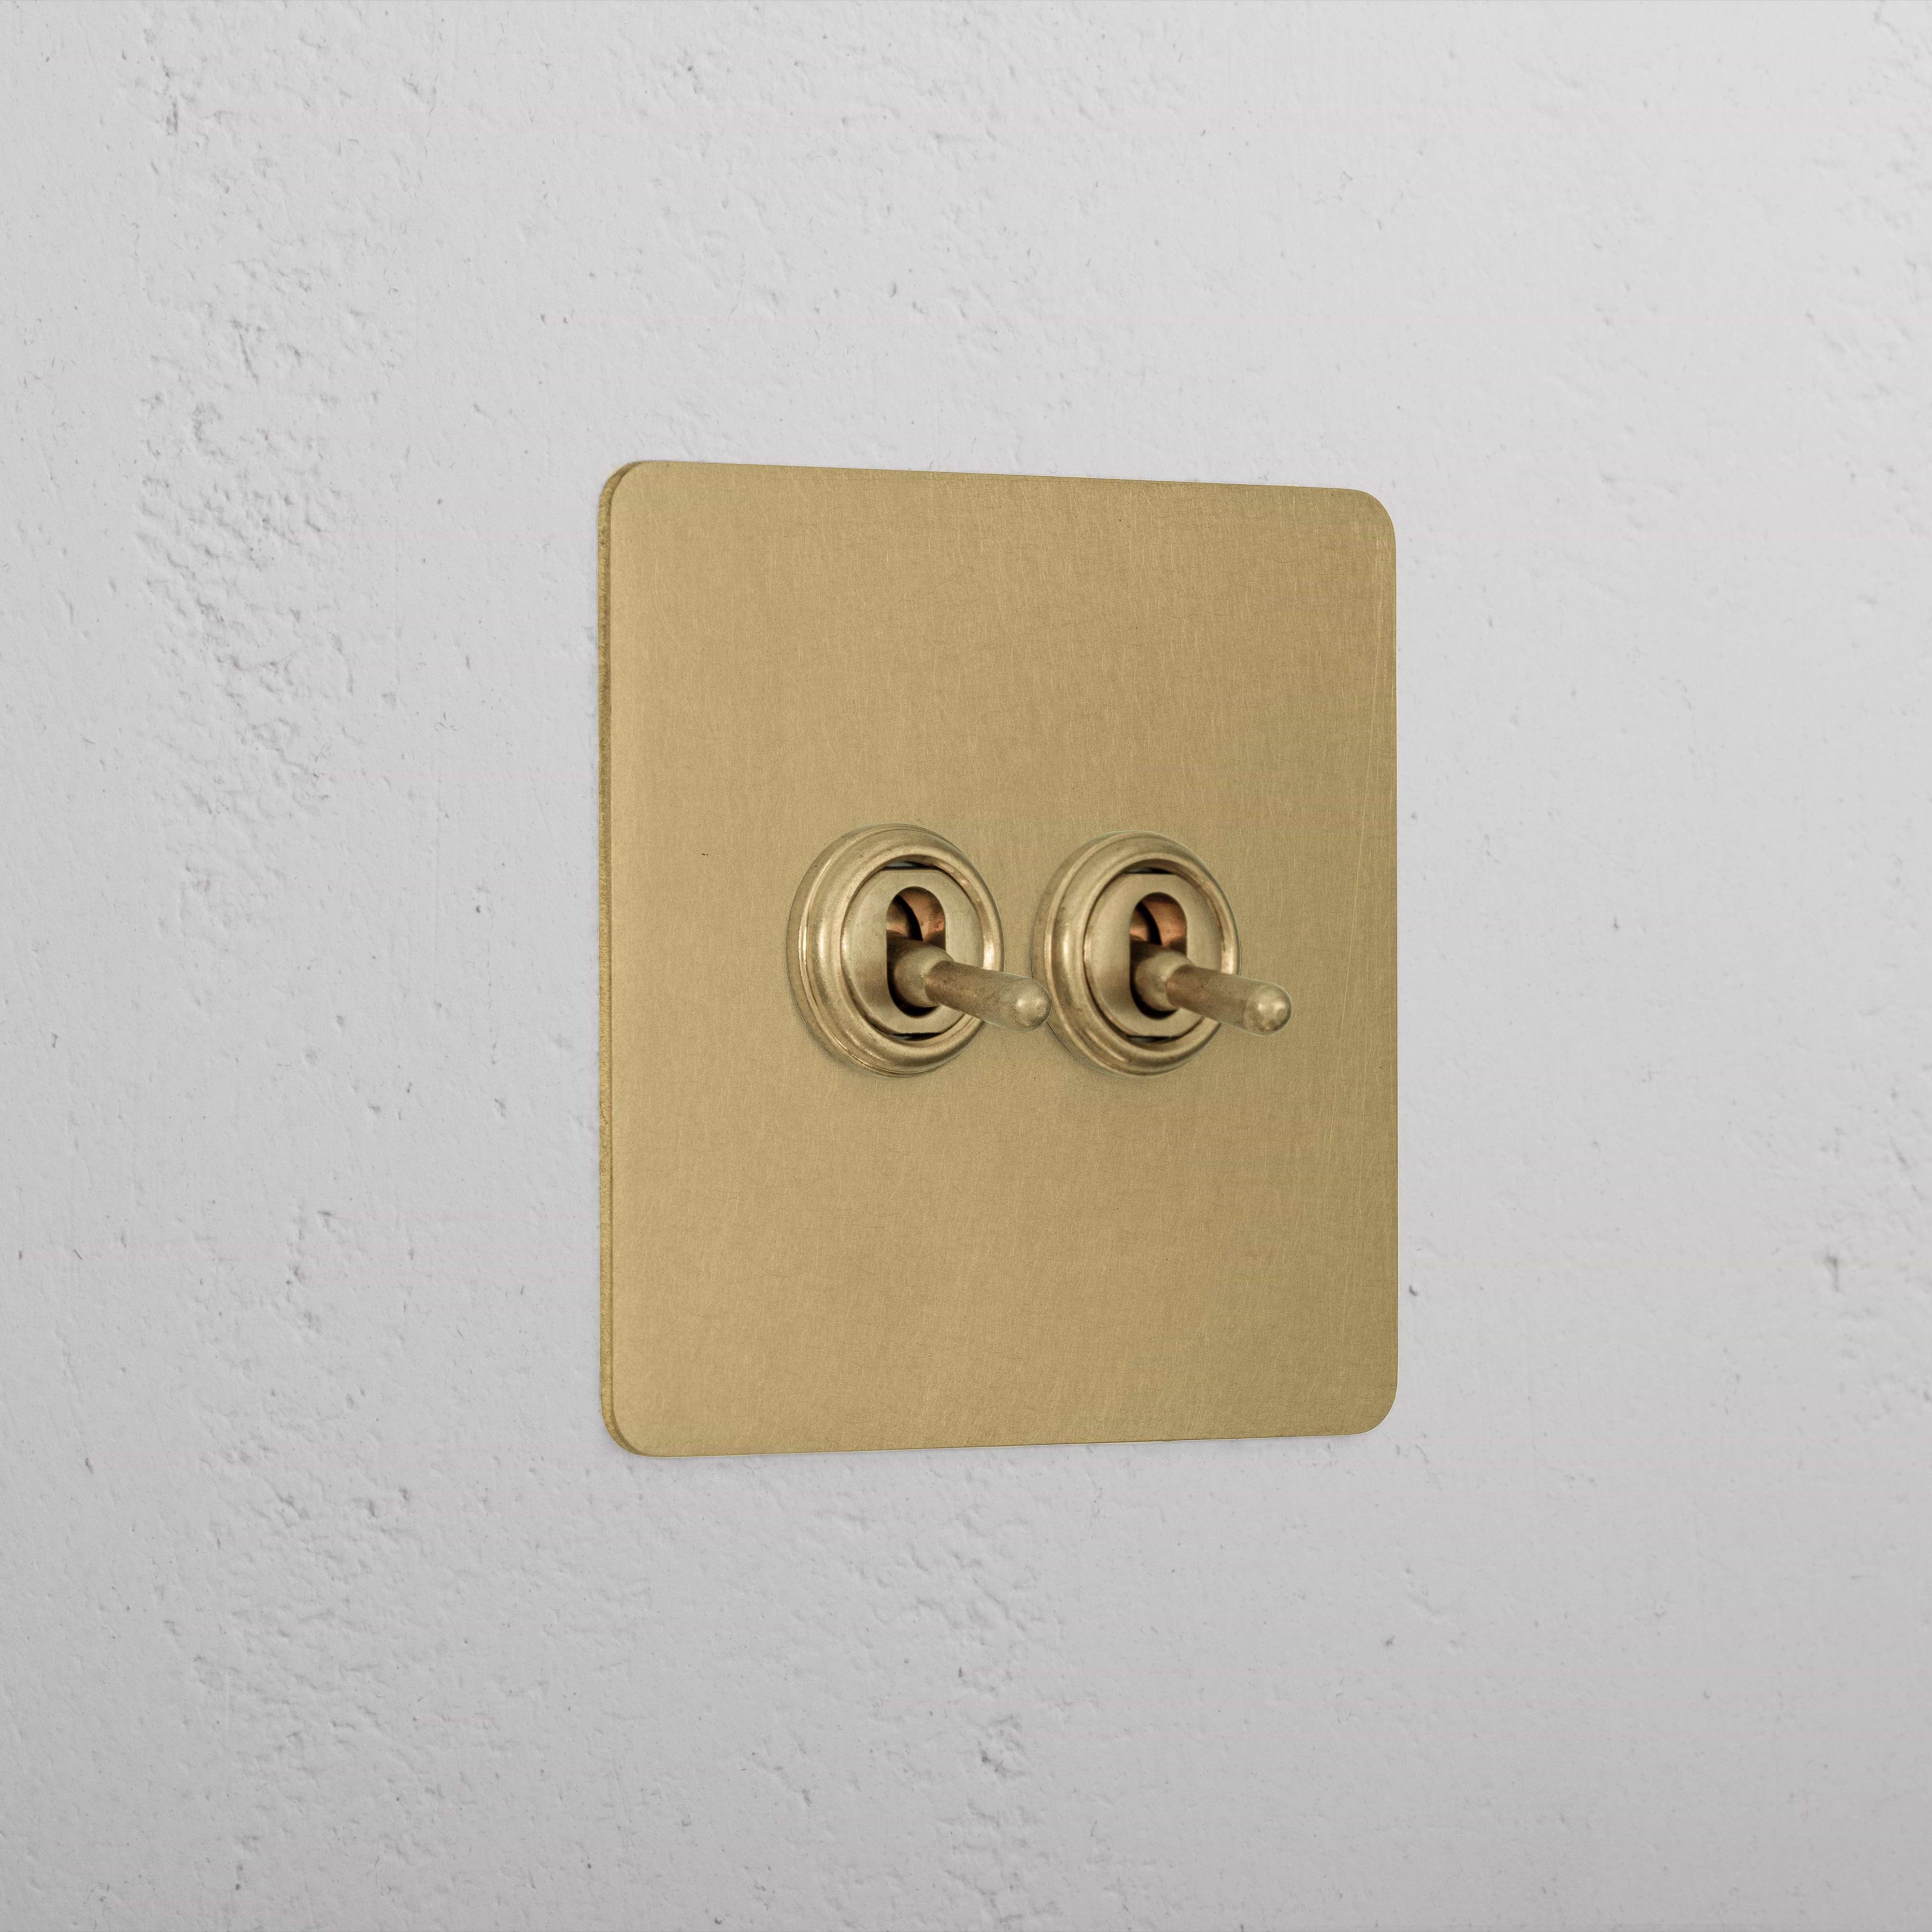 Interior Antique Brass 2 Gang 2 Way Toggle Light Switch